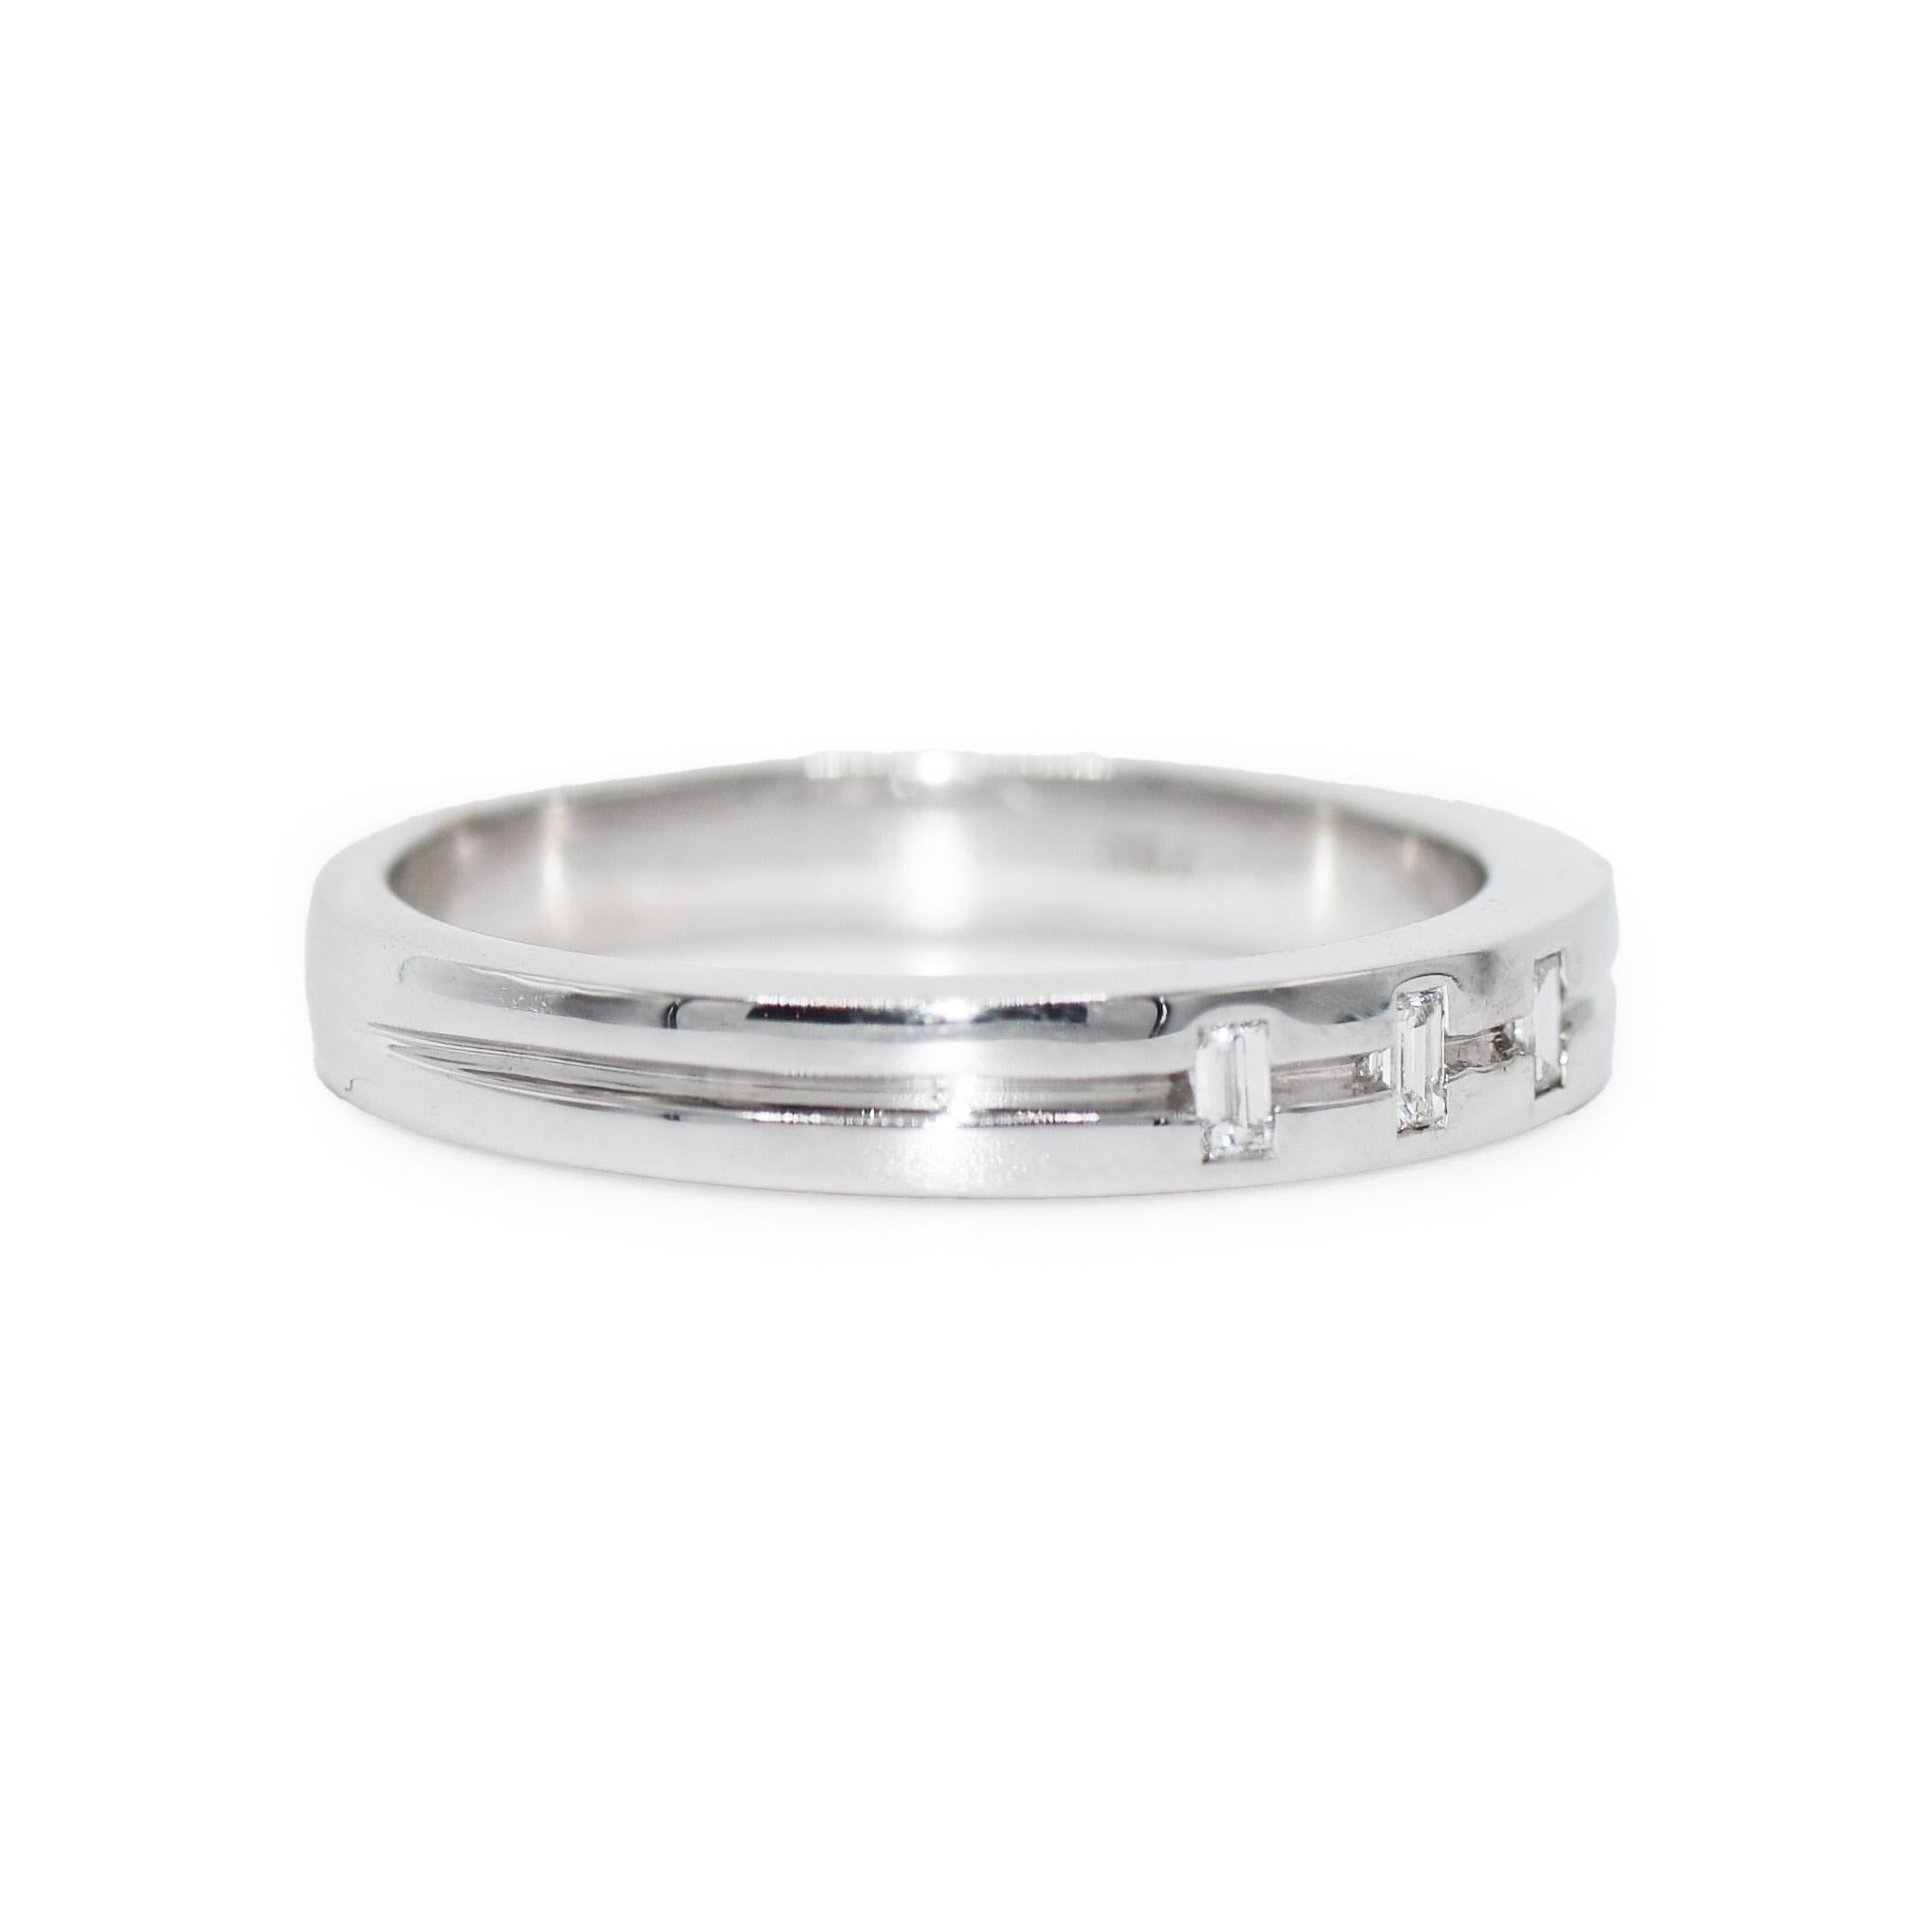 Men's 18k white gold wedding band with diamonds.
Stamped 750 and weighs 7.2 grams.
The diamonds are baguette cuts, G color, Vs clarity, .15 total carats.
The band measures 3.7mm wide.
Ring size is 10 3/4 and can be sized up to 11 1/4 or down to a